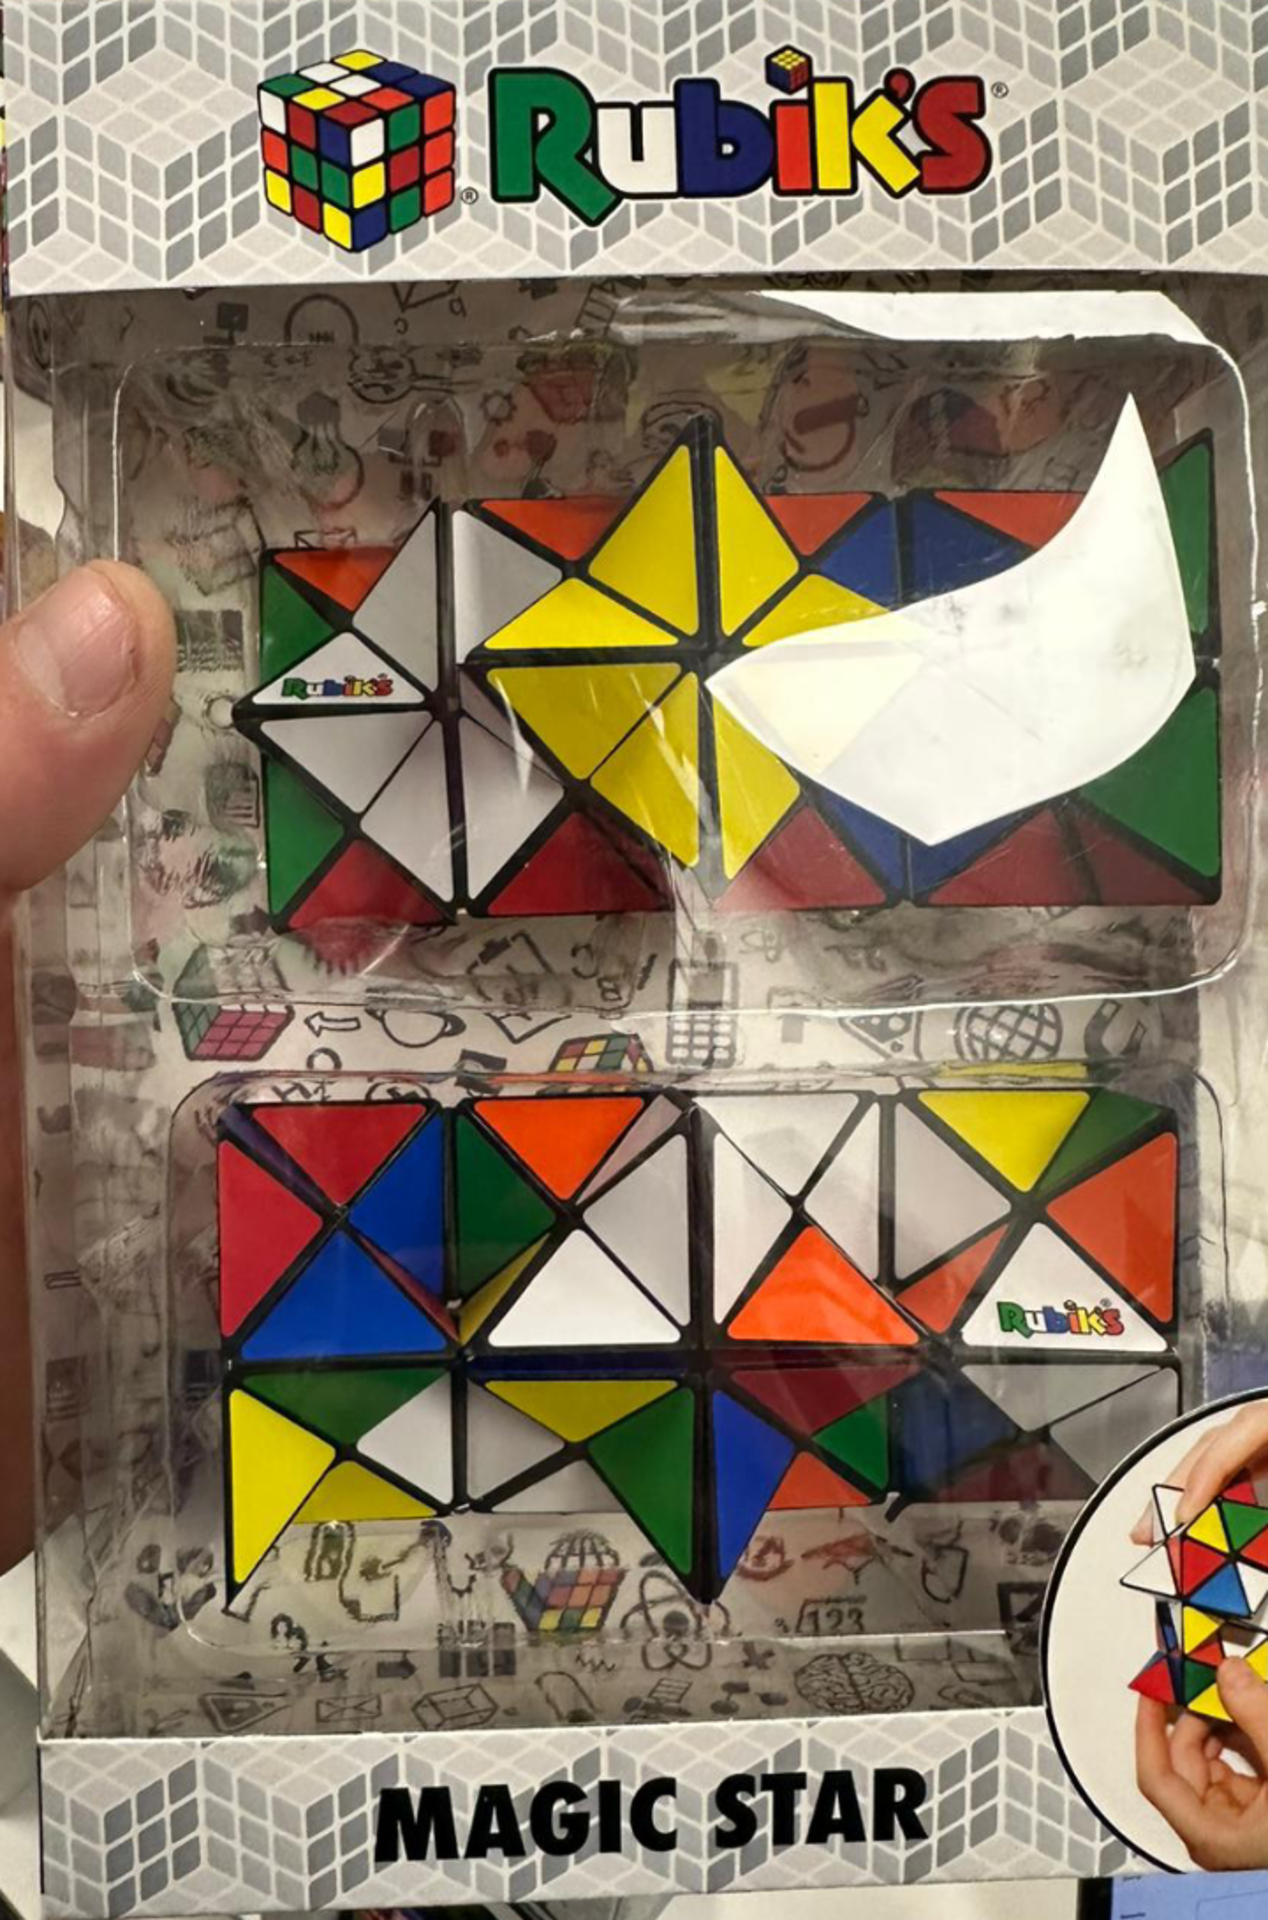 50 x Rubiks Magic Star Puzzle Sets | Total RRP £450 - Image 2 of 2